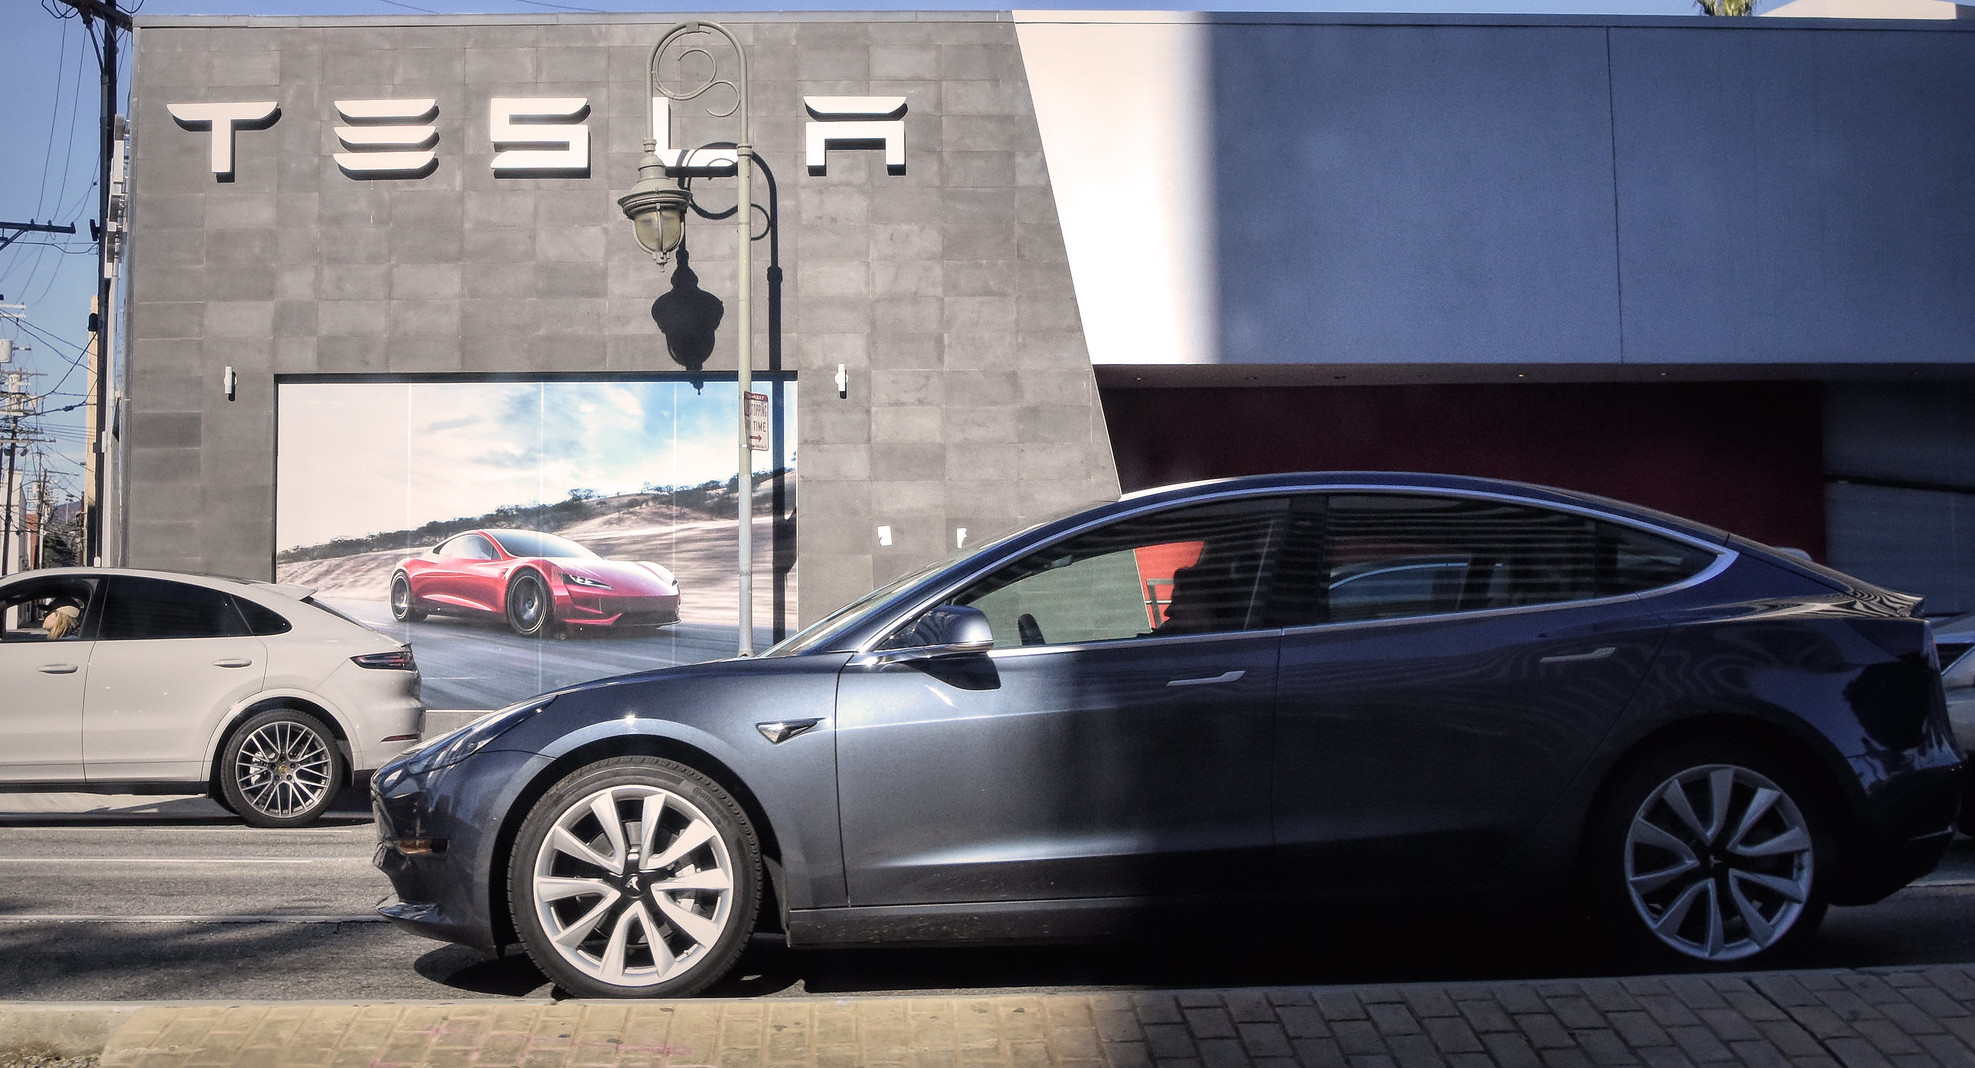 Tesla delivers over 201k vehicles in Q2 2021, meets Wall St’s estimates